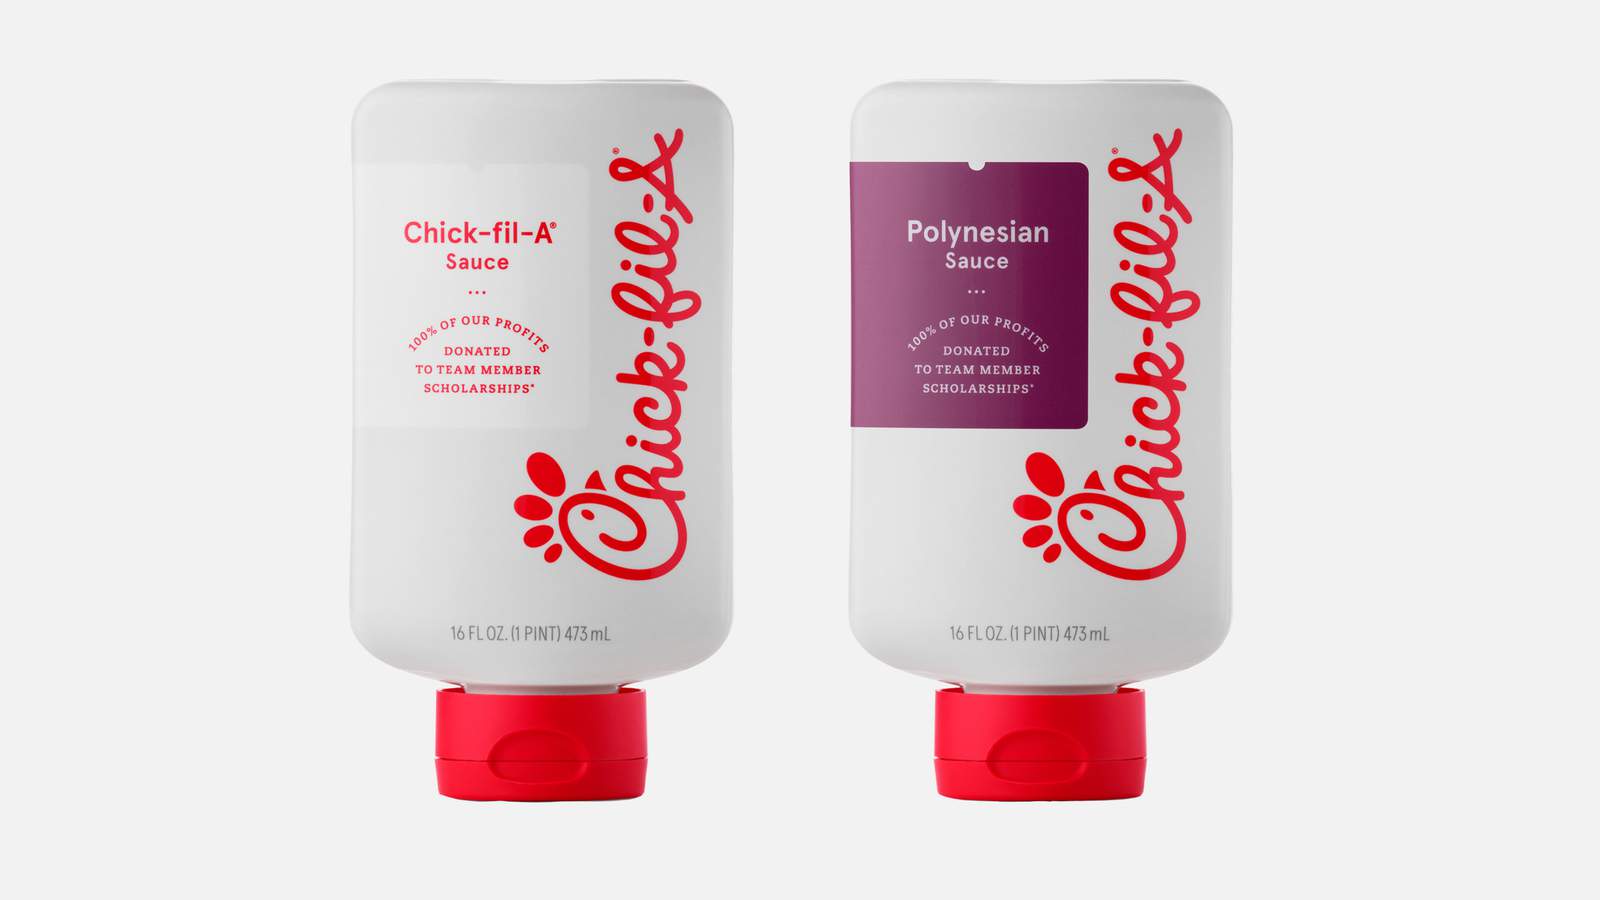 Chick-fil-A sauces to be sold in select stores nationwide in 2021